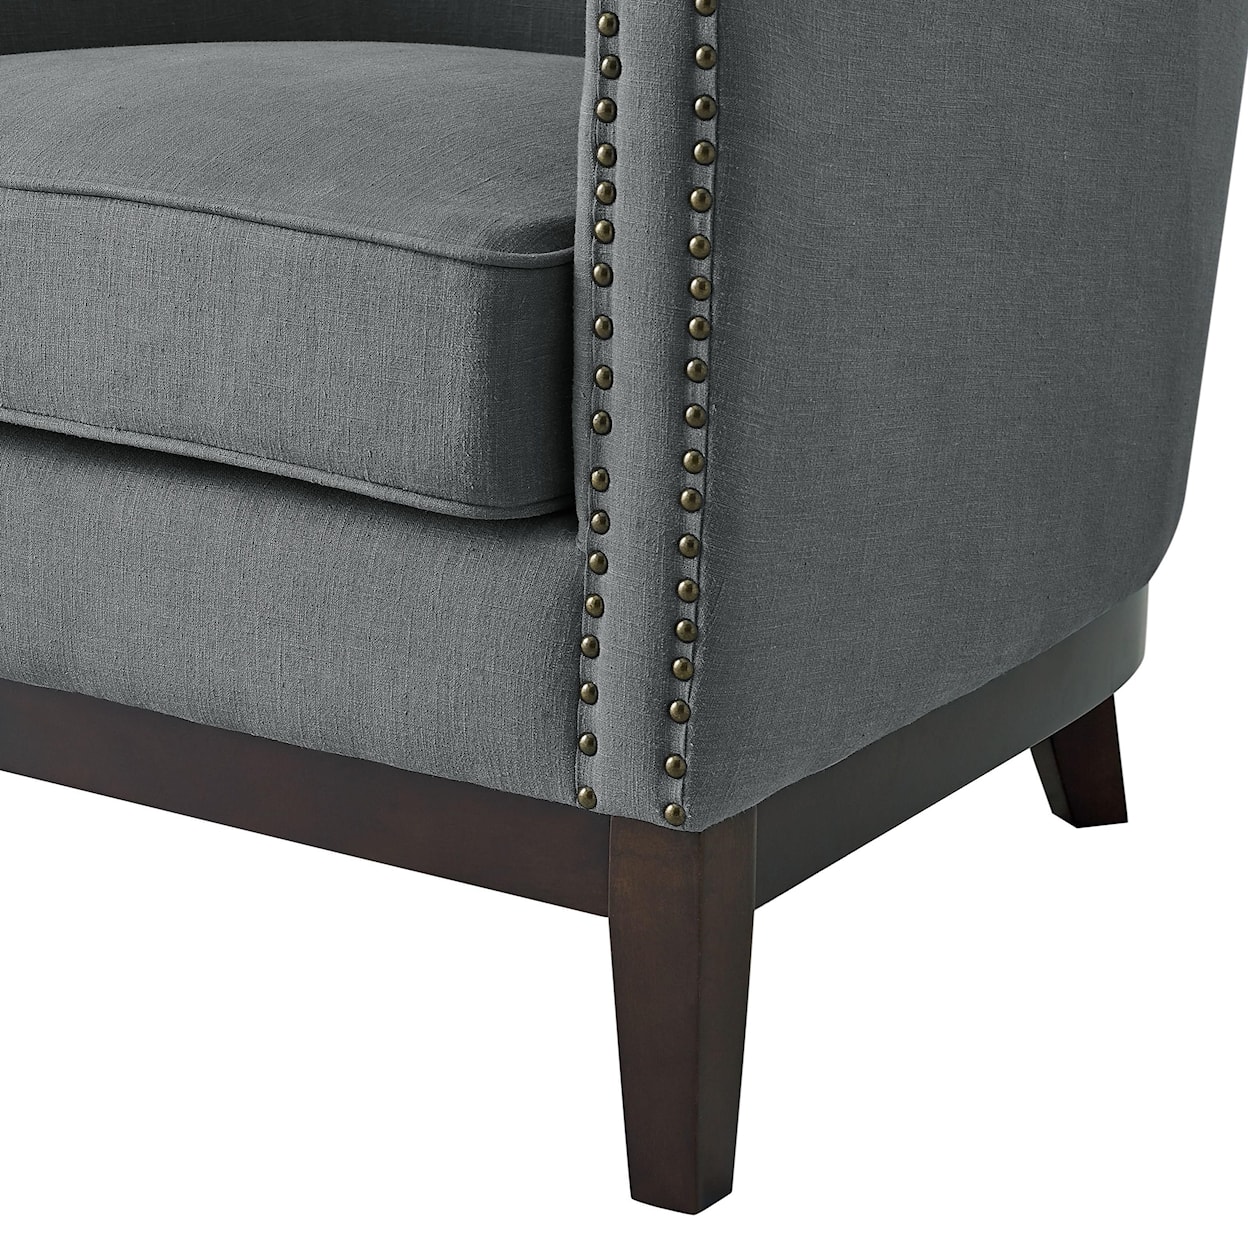 Prime Roswell Linen Accent Chair with Brass Nailhead Trim